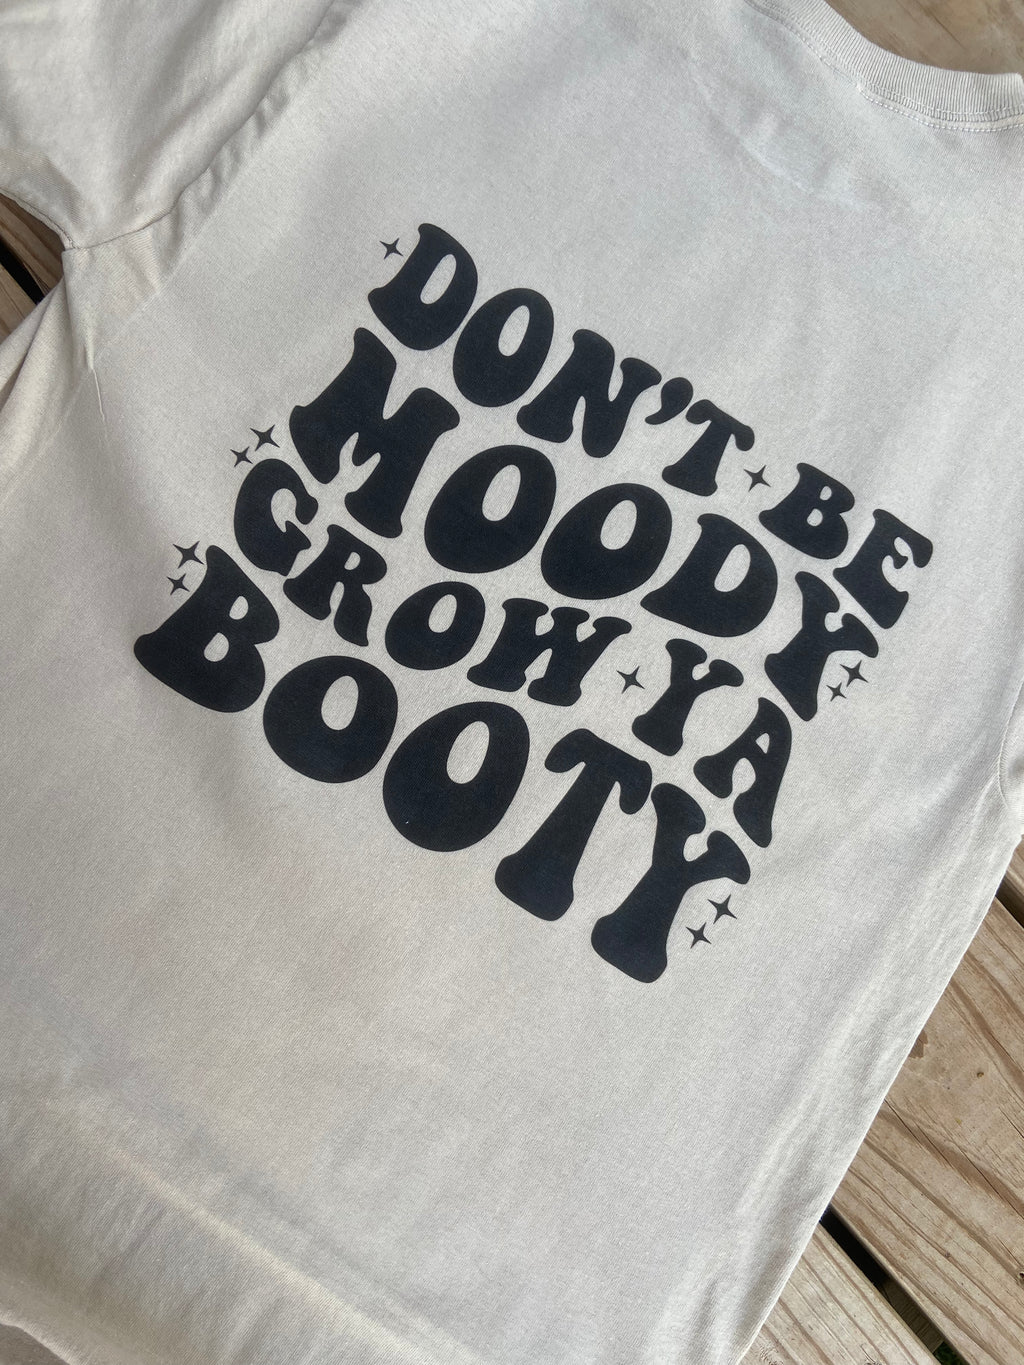 Don't be mood grow your booty design